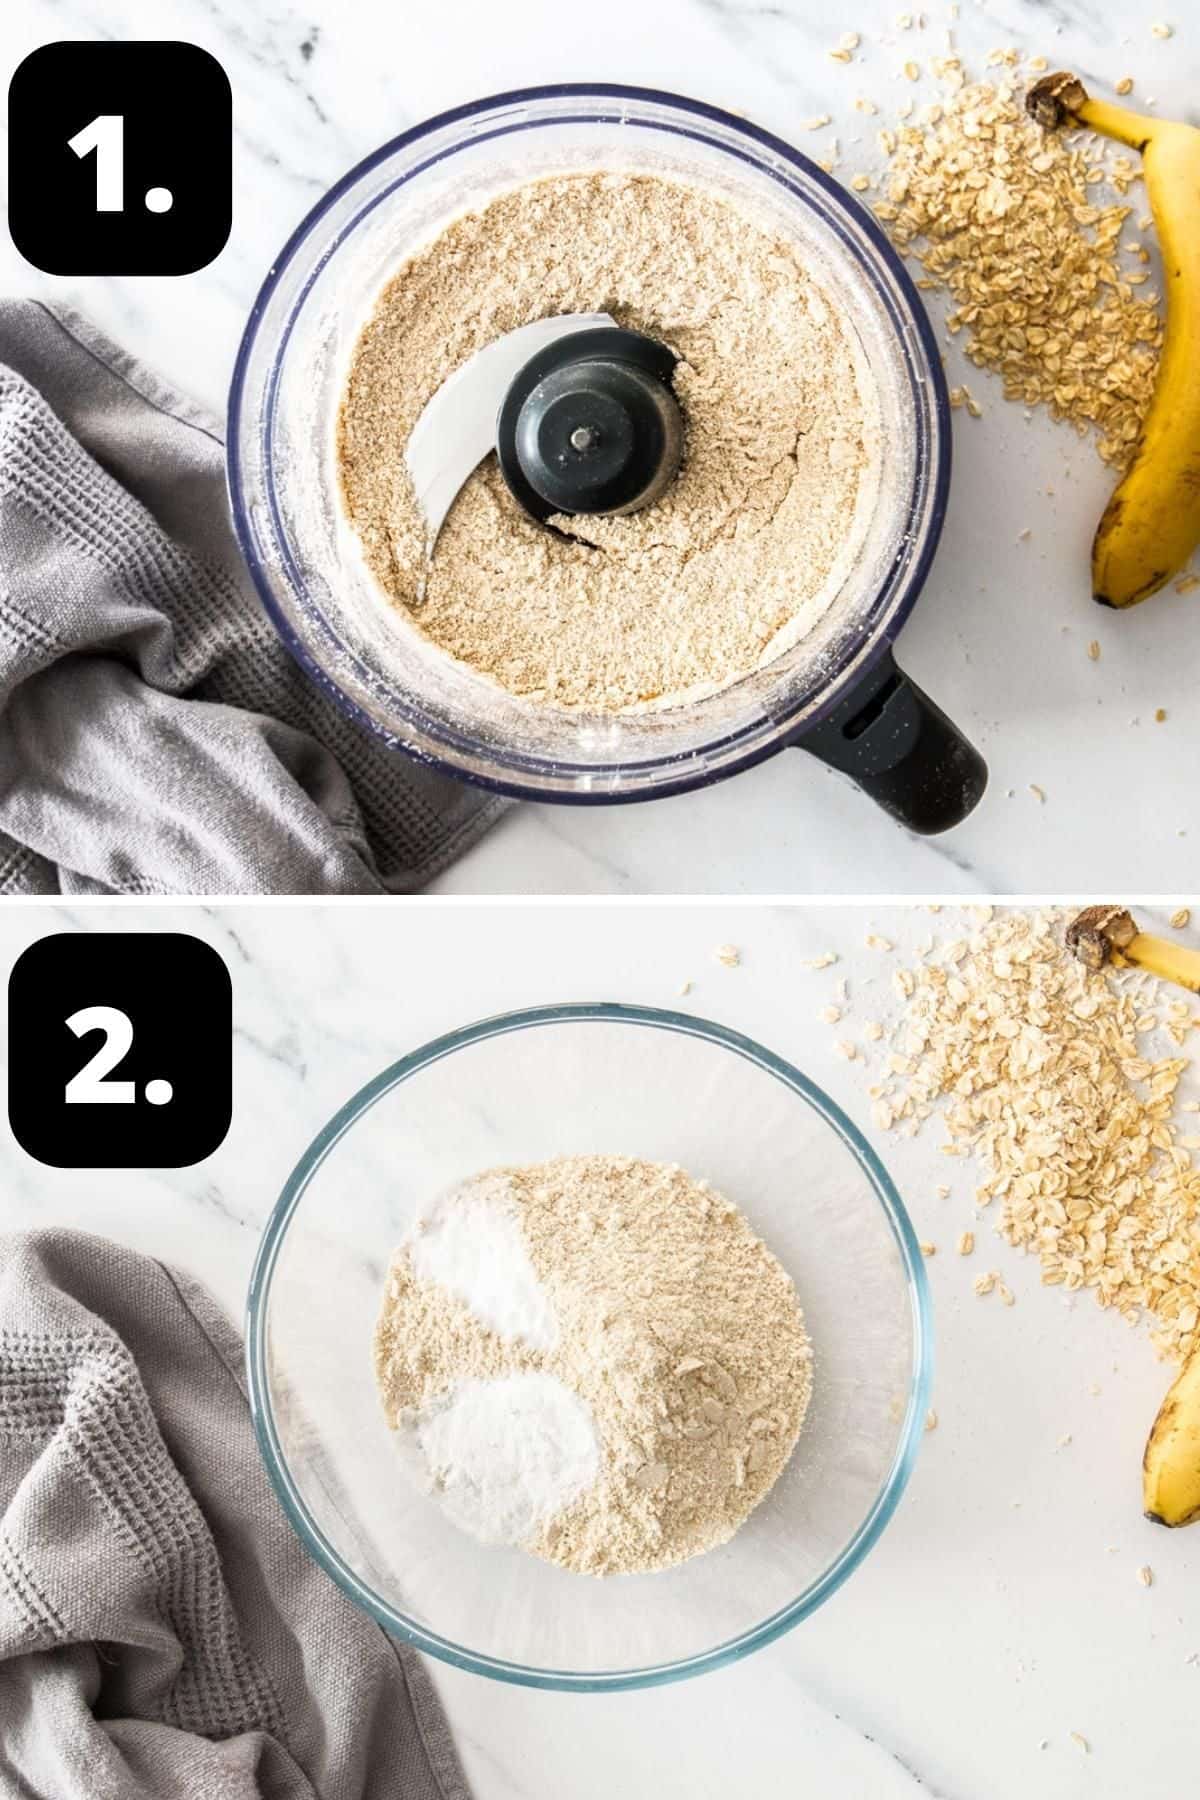 Steps 1-2 of preparing this recipe - blending the oats into flour, and adding to a bowl with the other dry ingredients.